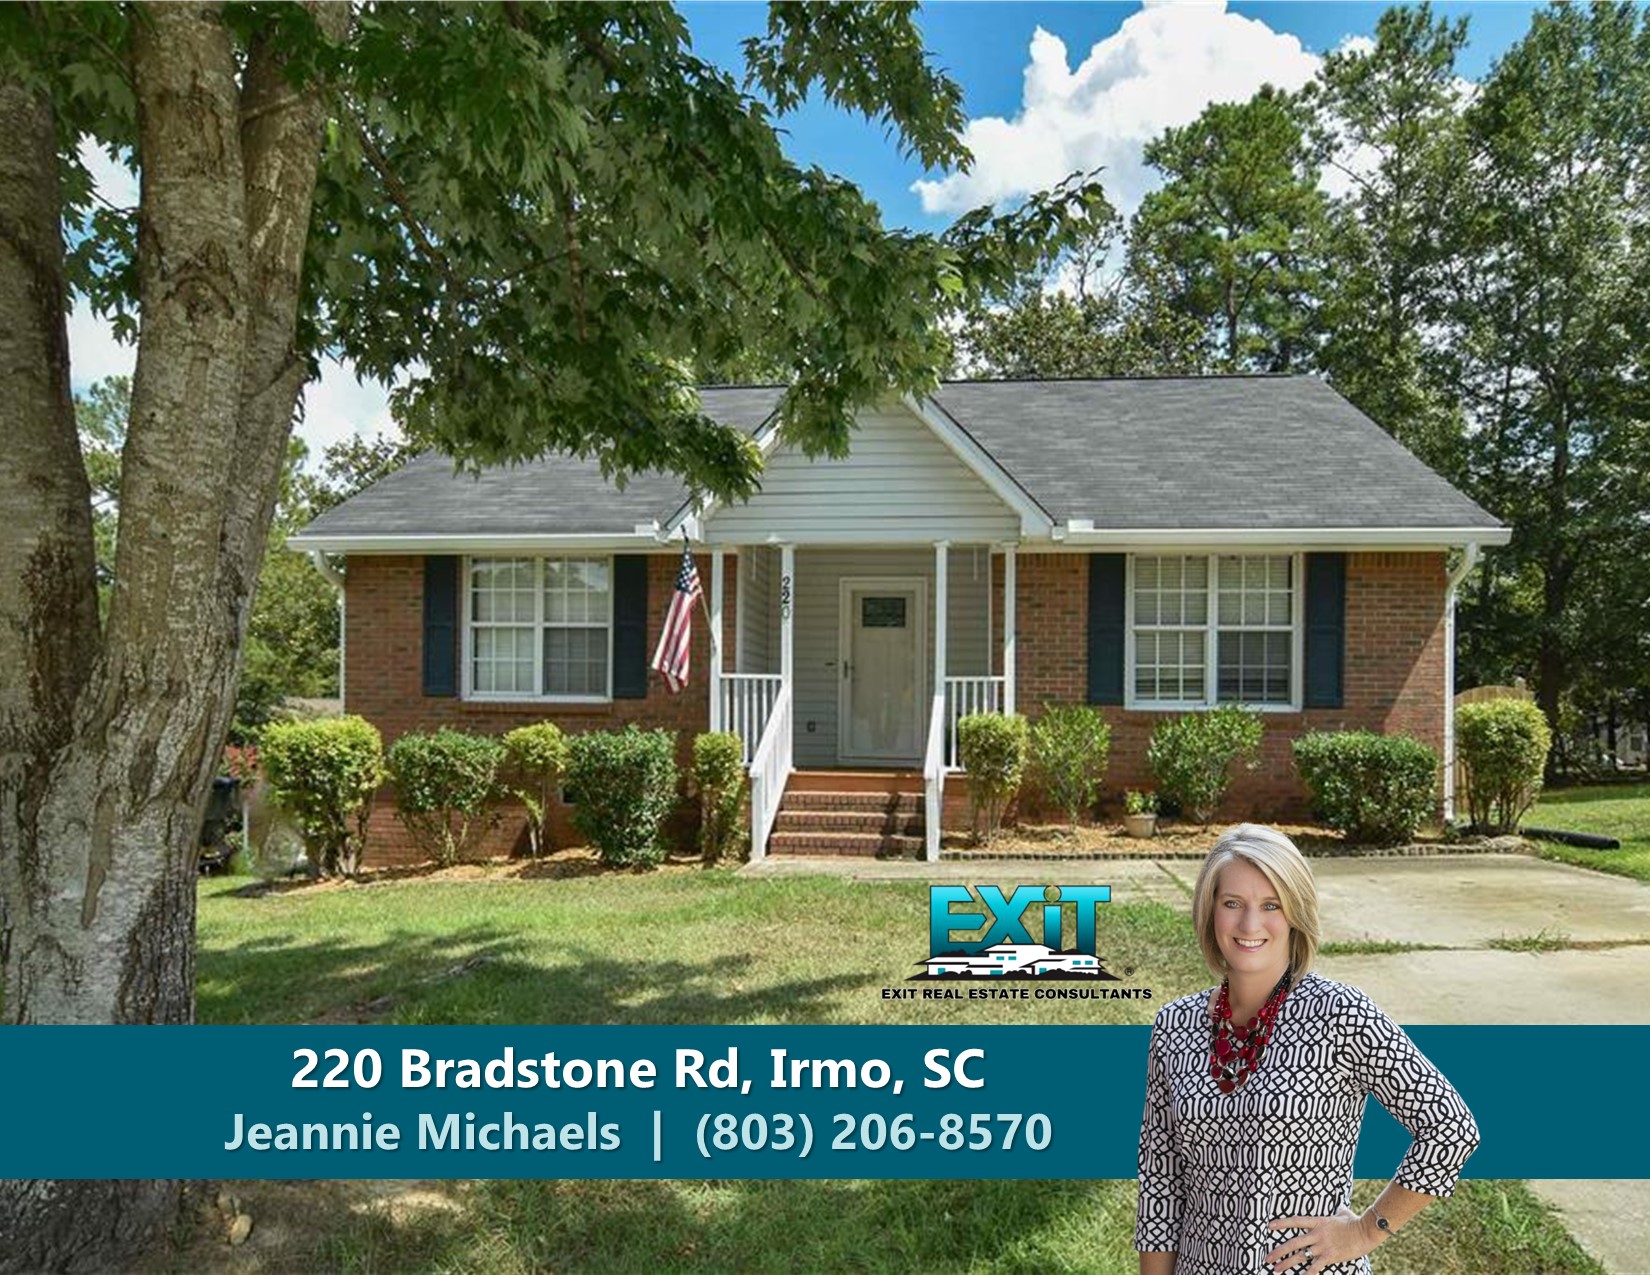 Just listed in Glenridge - Irmo